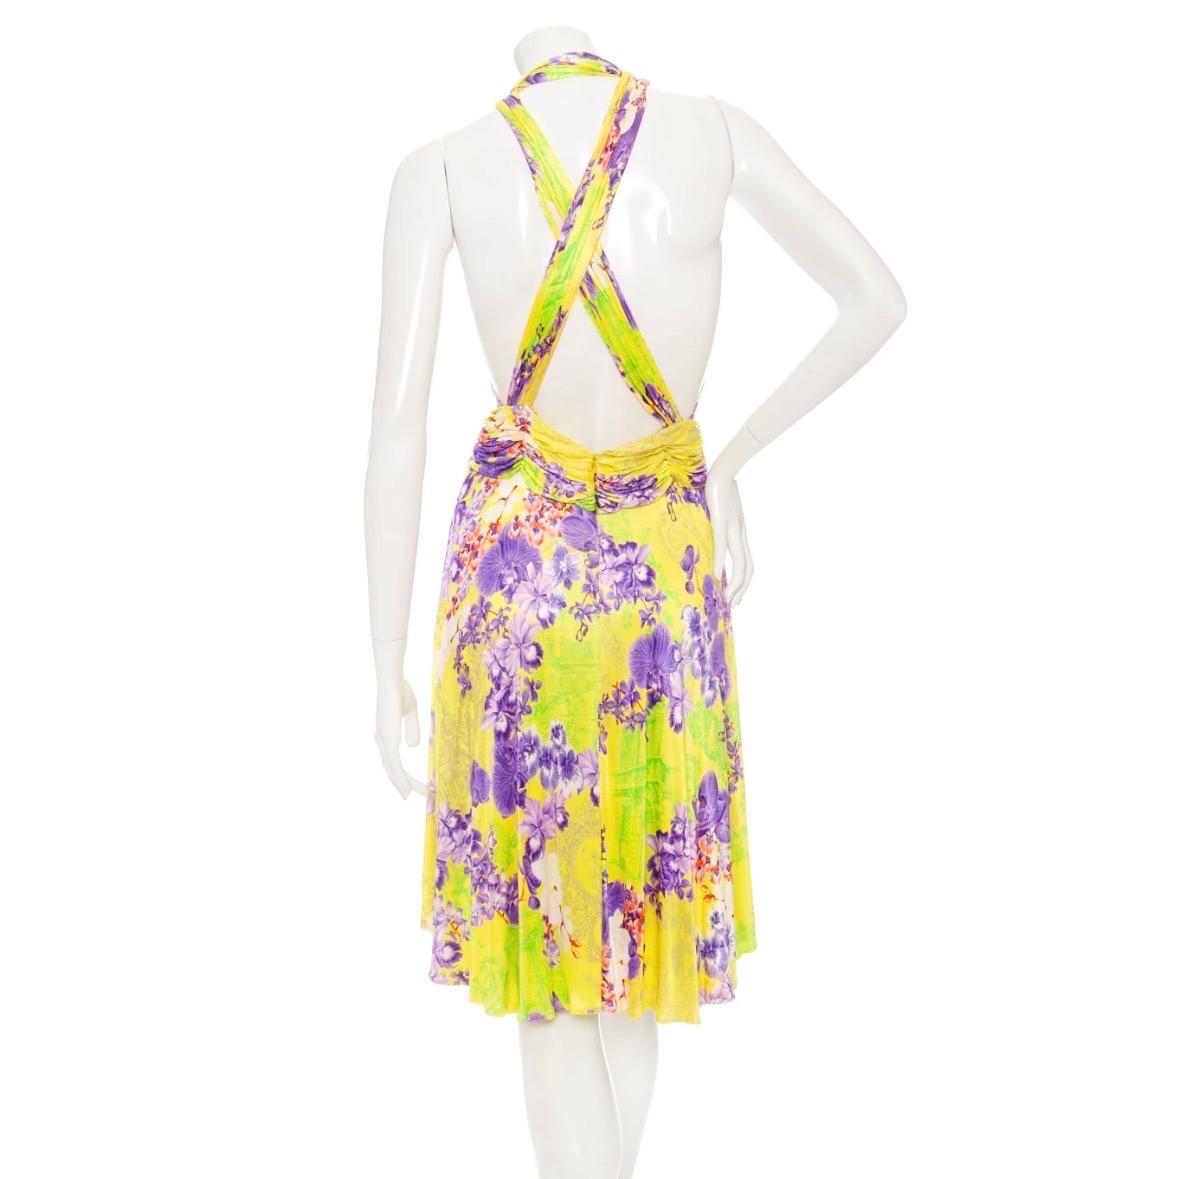 Versace 2004 Yellow Slinky Floral-Print Halter Dress In Good Condition For Sale In Los Angeles, CA